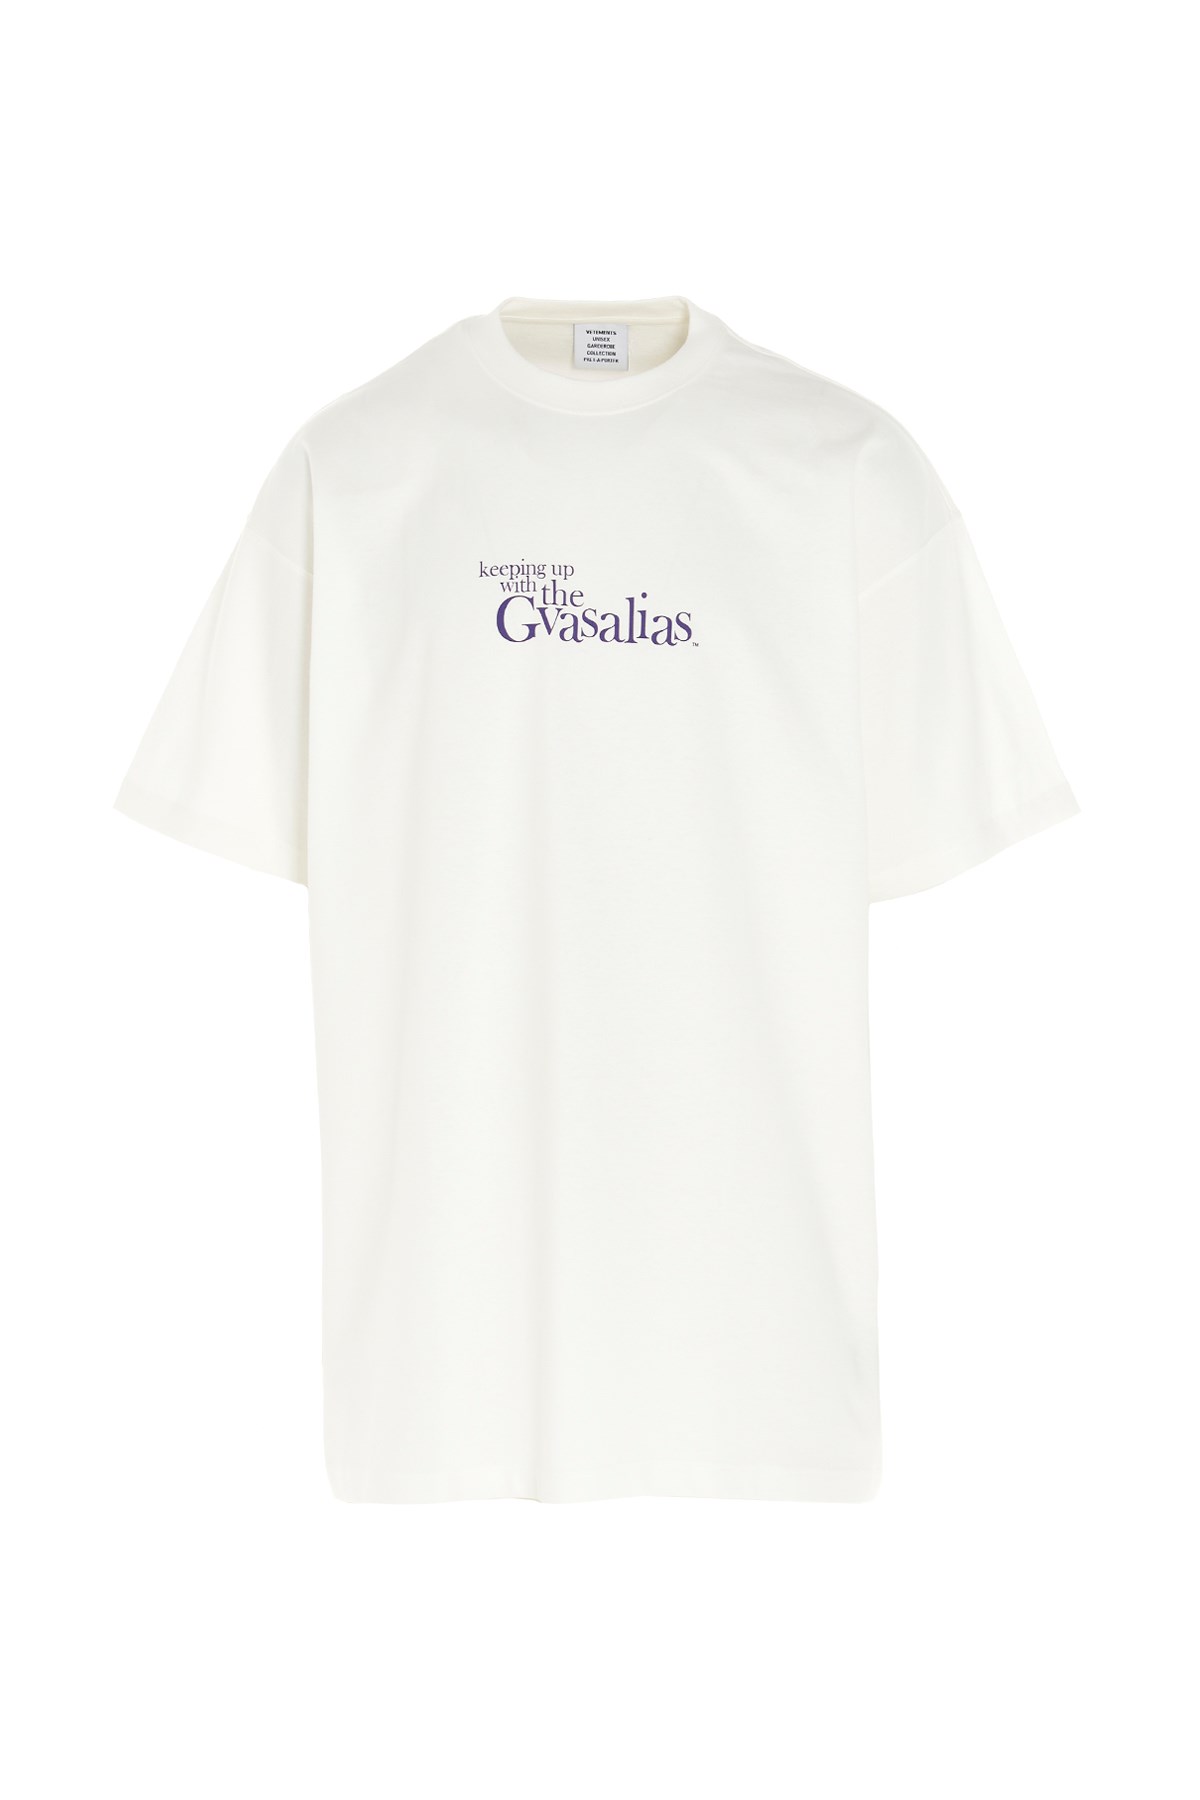 VETEMENTS ‘Keeping Up With The Gvasalias’ T-Shirt